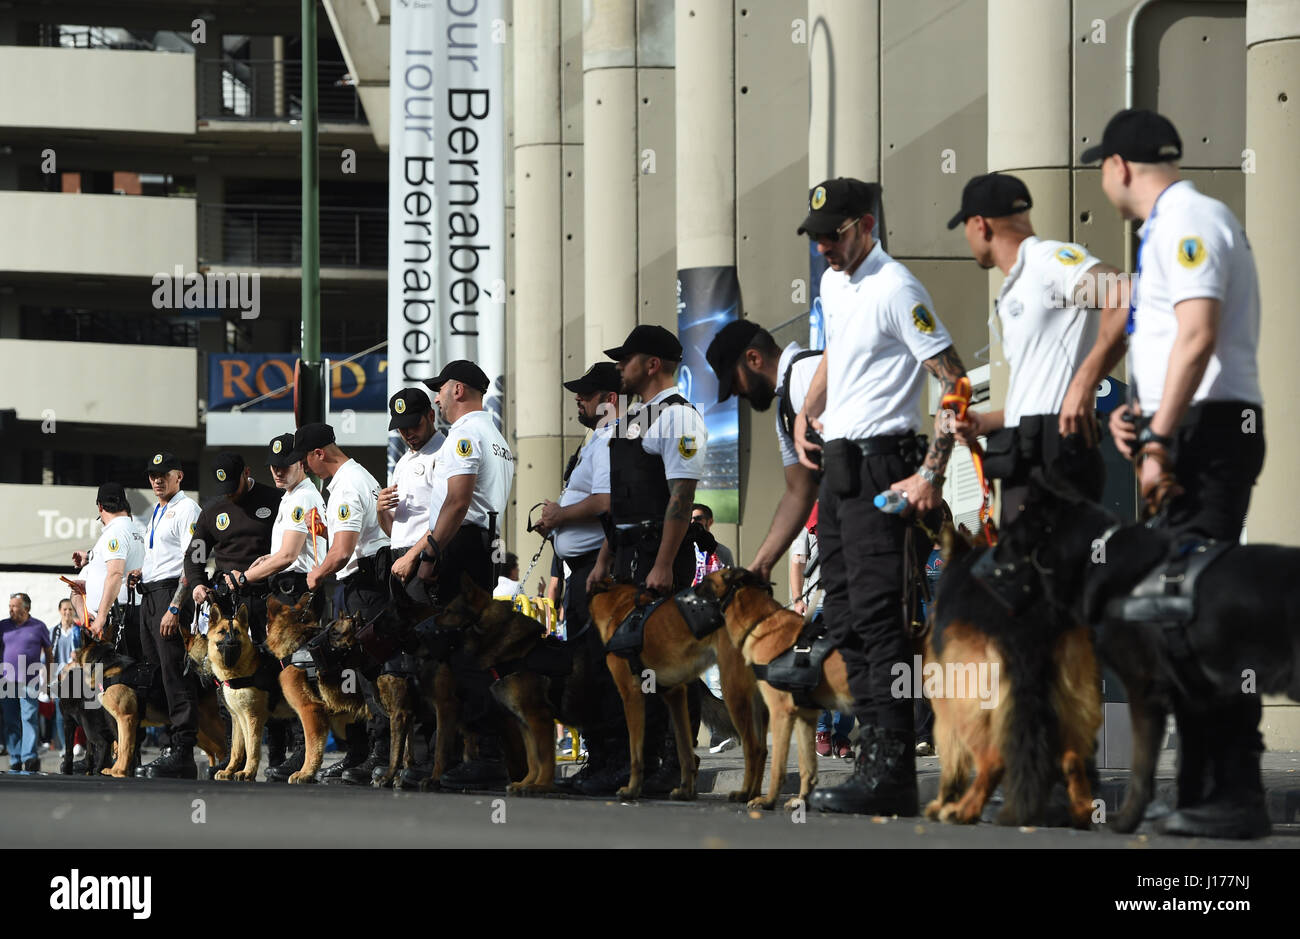 Madrid, Spain. 18th Apr, 2017. Dog handlers of a security service and their dogs can be seen outside the stadium before the Champions League quarterfinals second leg match between Real Madrid and Bayern Munich at the Santiago Bernabeu Stadium in Madrid, Spain, 18 April 2017. Photo: Andreas Gebert/dpa/Alamy Live News Stock Photo